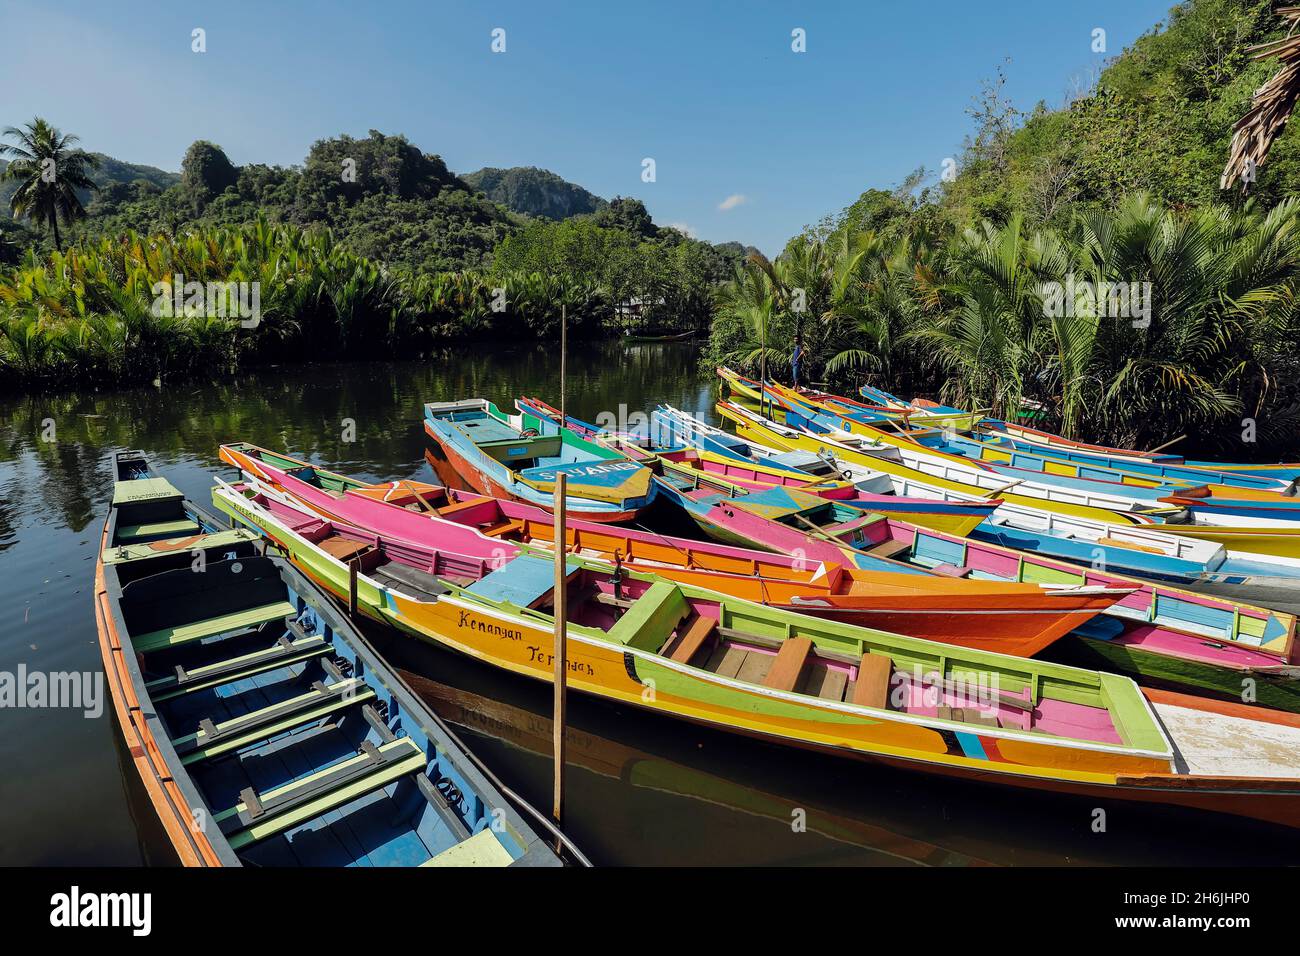 Tourist tour boats on Pute River in karst limestone region, Rammang-Rammang, Maros, South Sulawesi, Indonesia, Southeast Asia, Asia Stock Photo